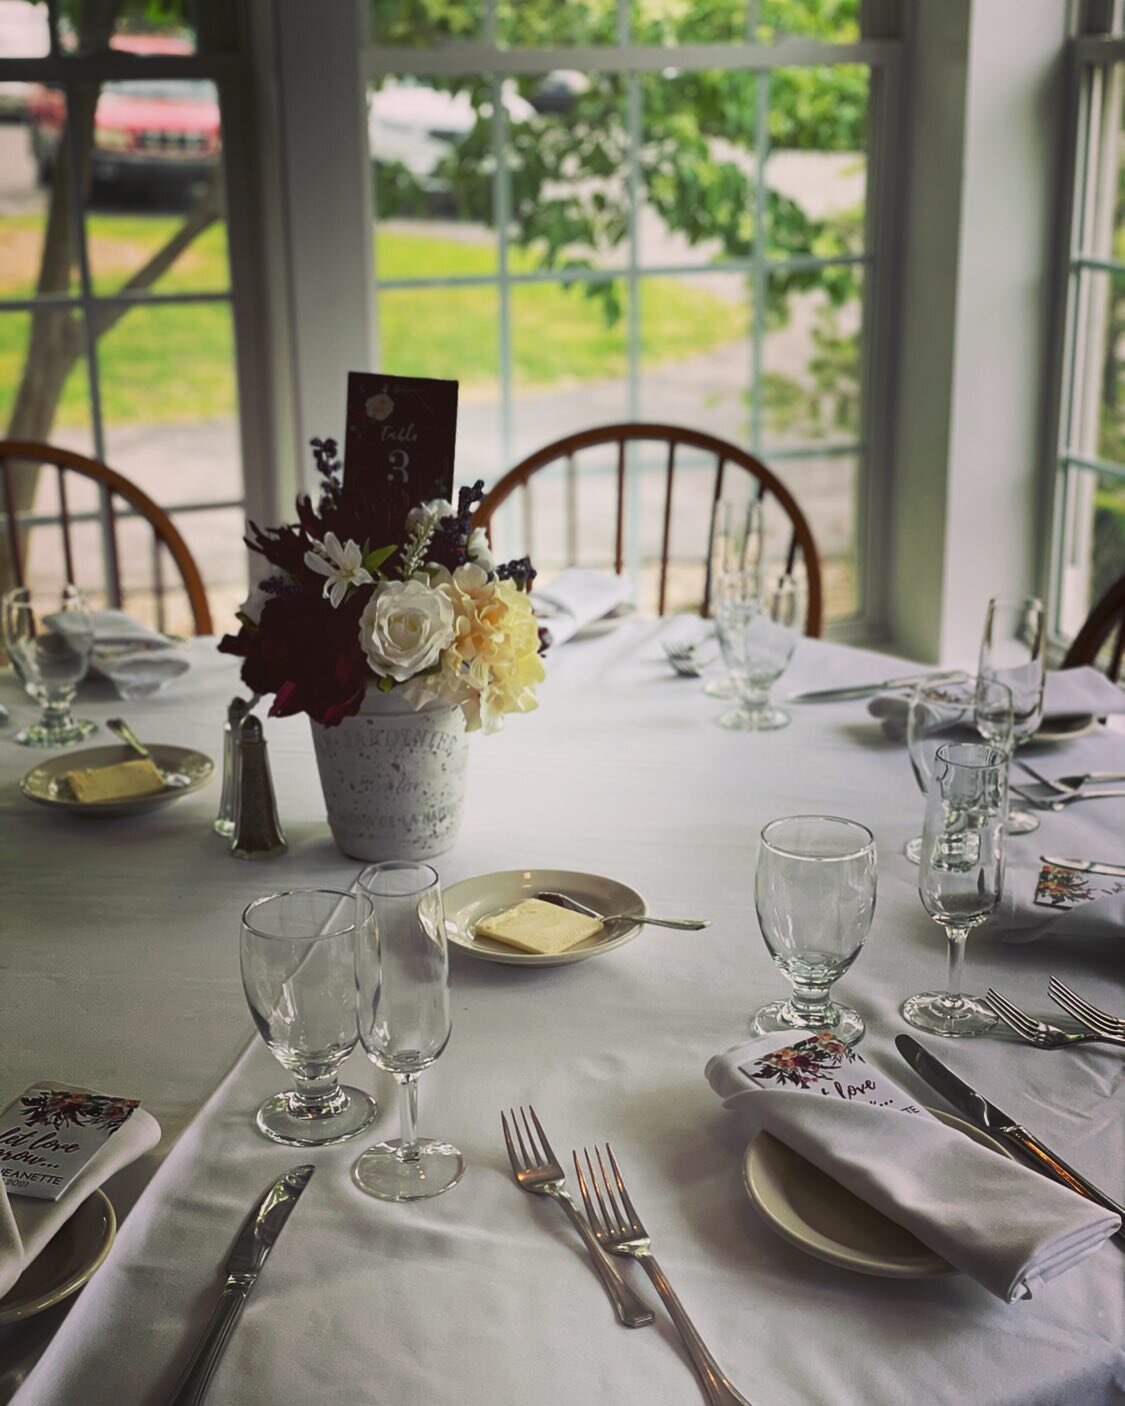 Our Main Dining Room is the perfect place for events and micro weddings all year round.